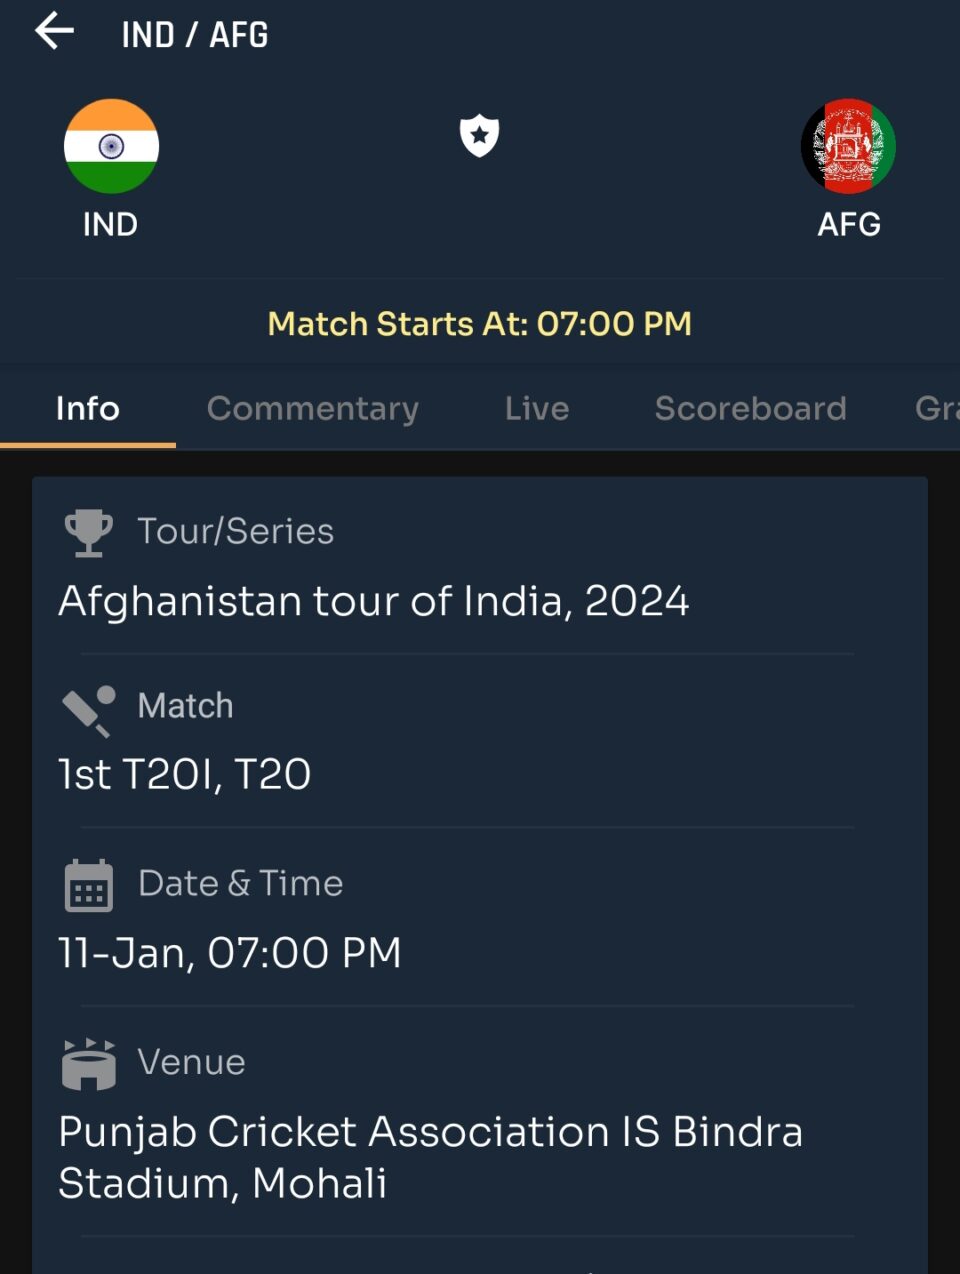 1st T20 Match Prediction |IND vs AFG | Team Prediction | Toss and Match Analysis | Pitch & Weather Report | Probable 11